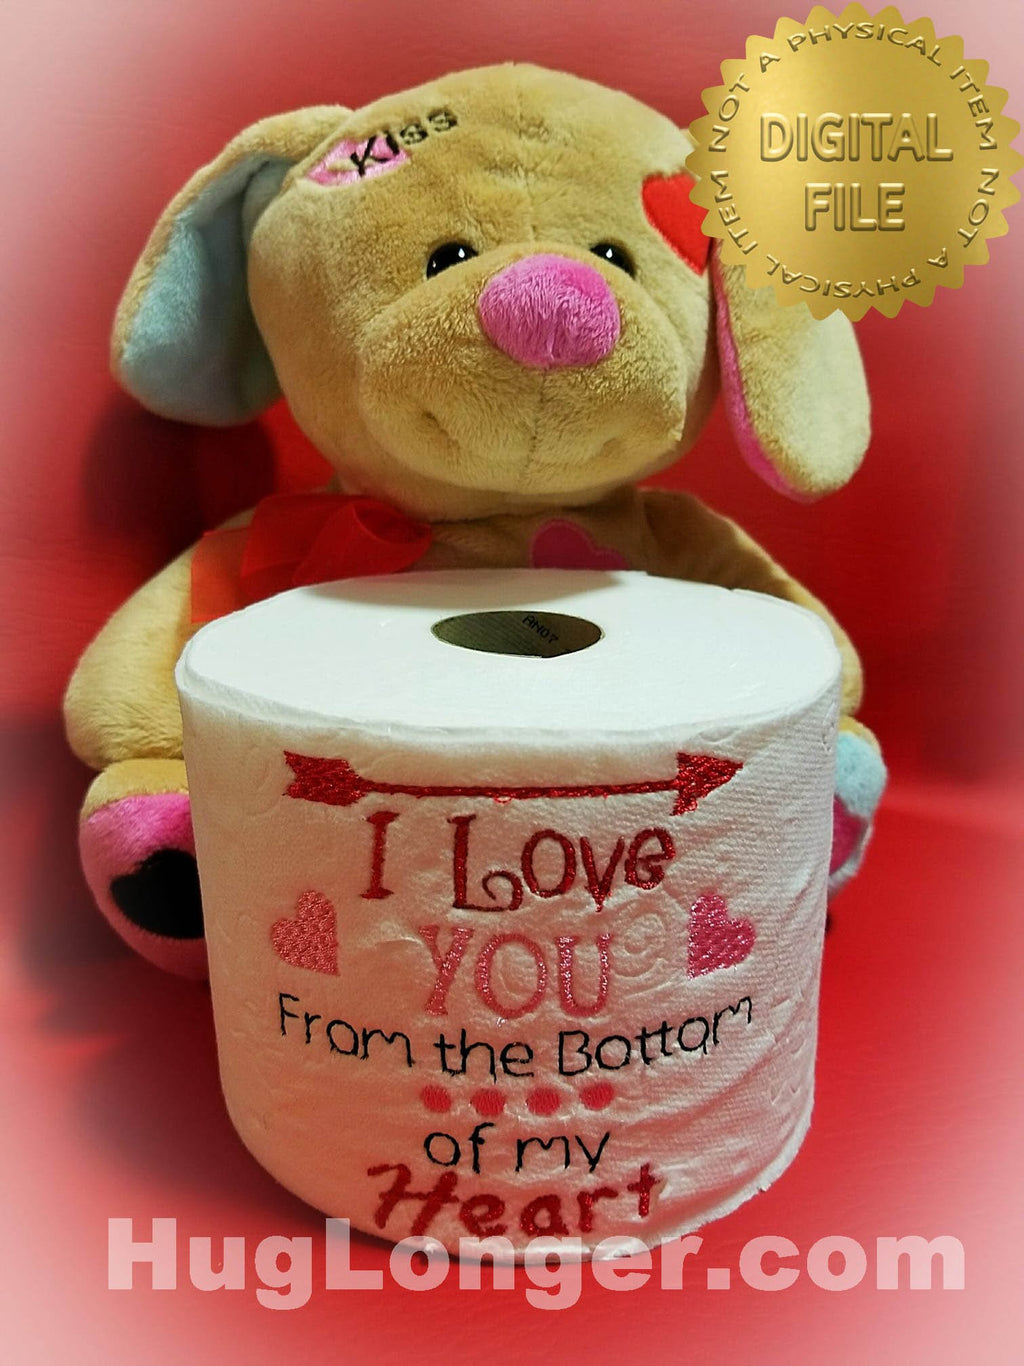 HL I Love You From the Bottom of my Heart TP HL2479 embroidery files